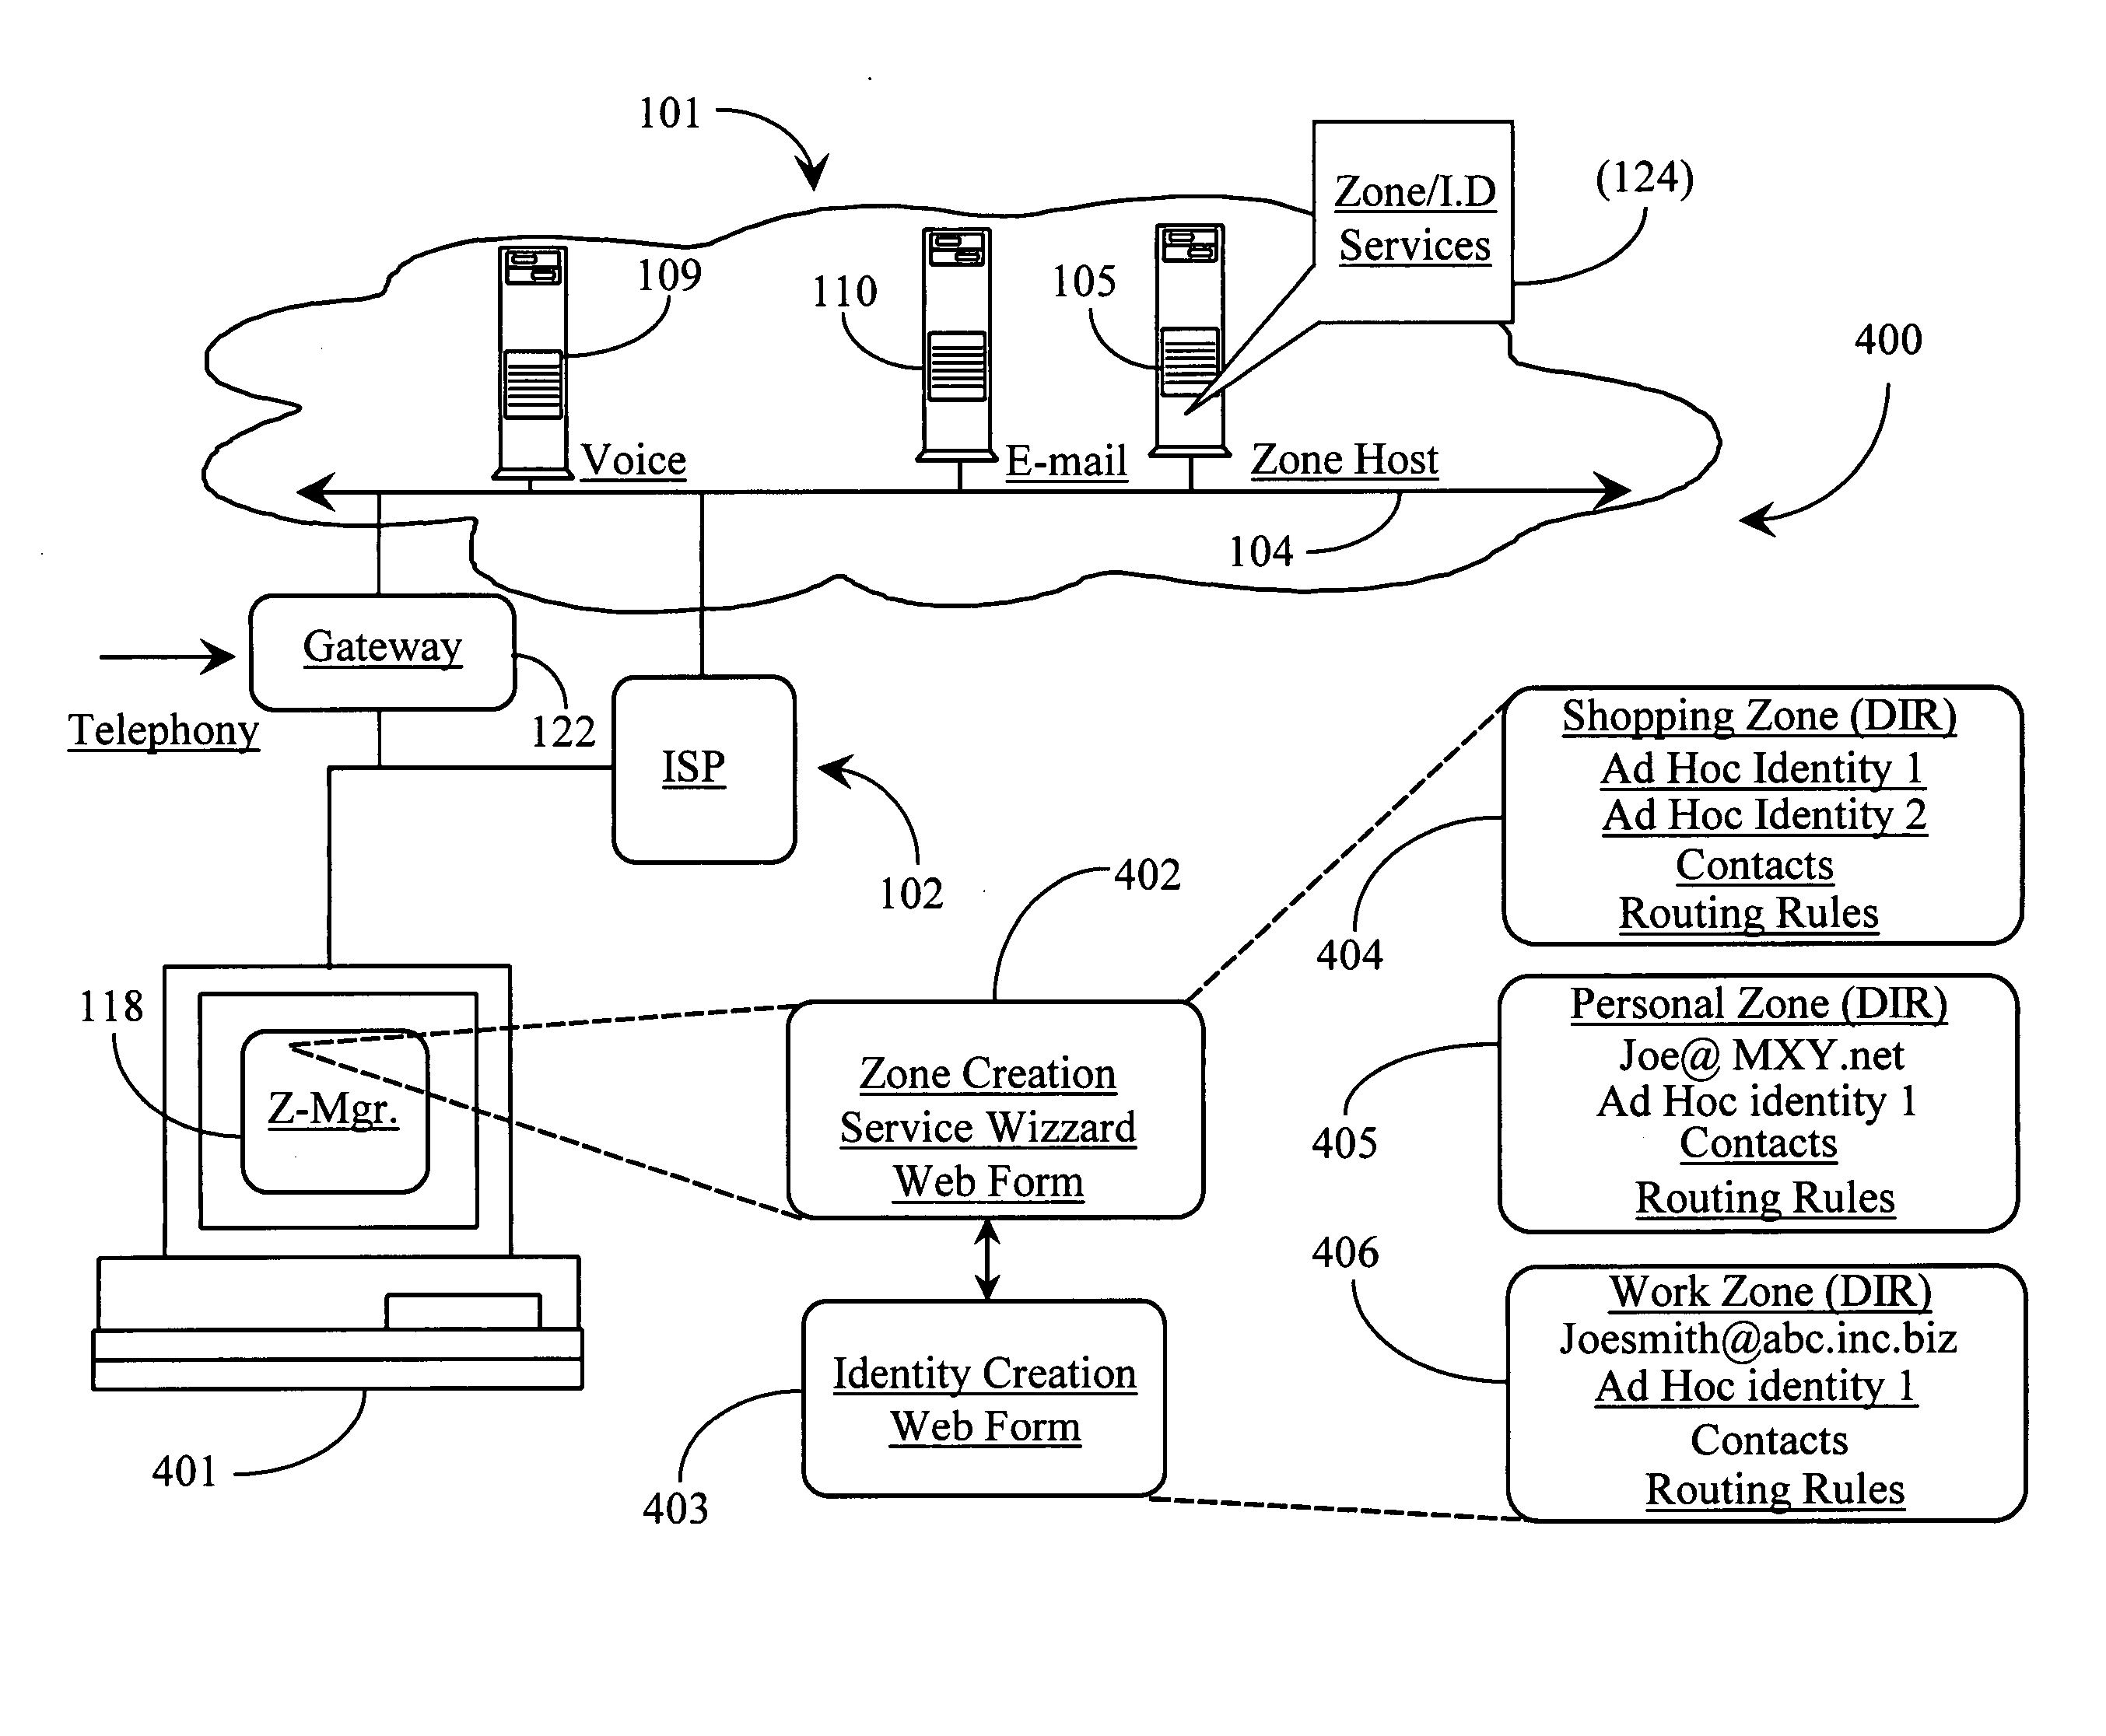 Methods and apparatus for identifying and facilitating a social interaction structure over a data packet network